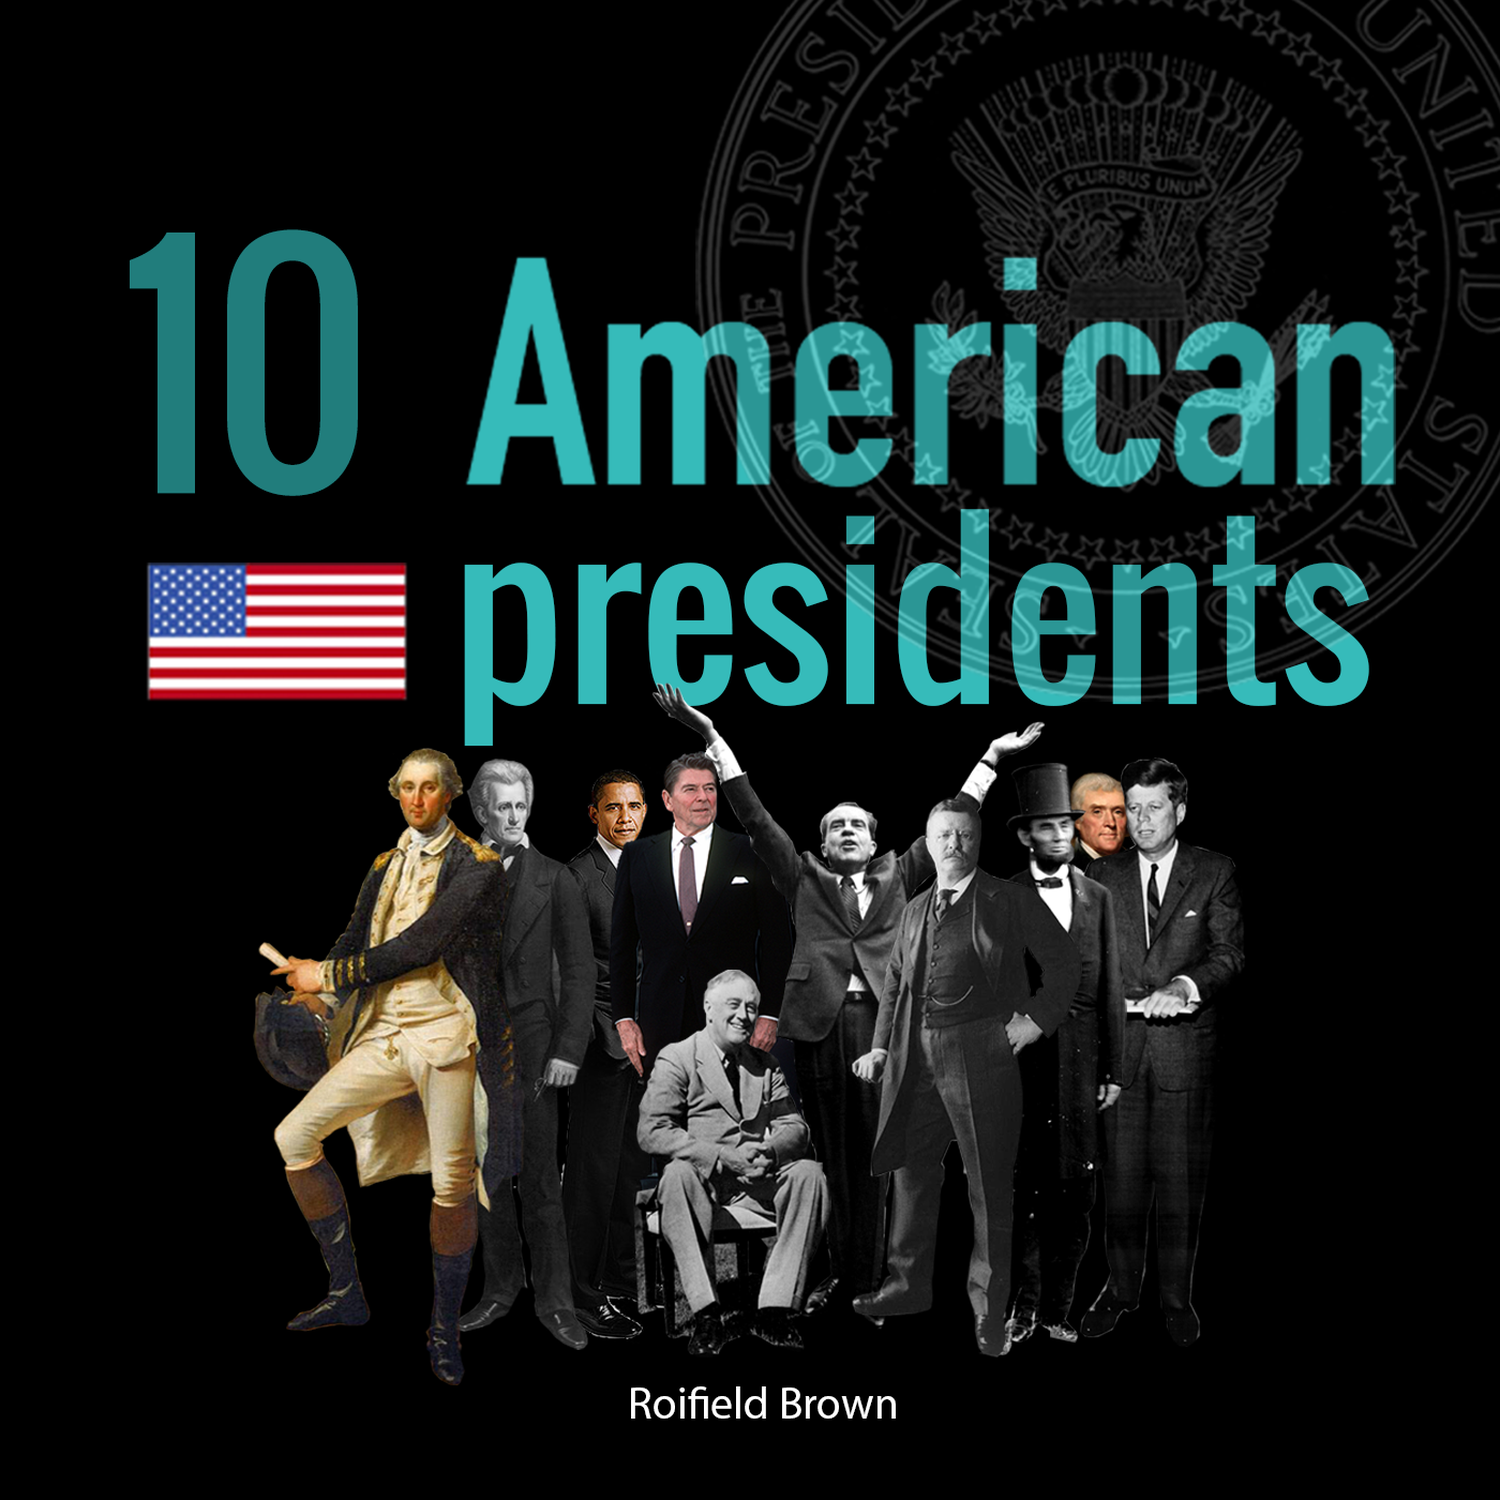 10 American Presidents Podcast